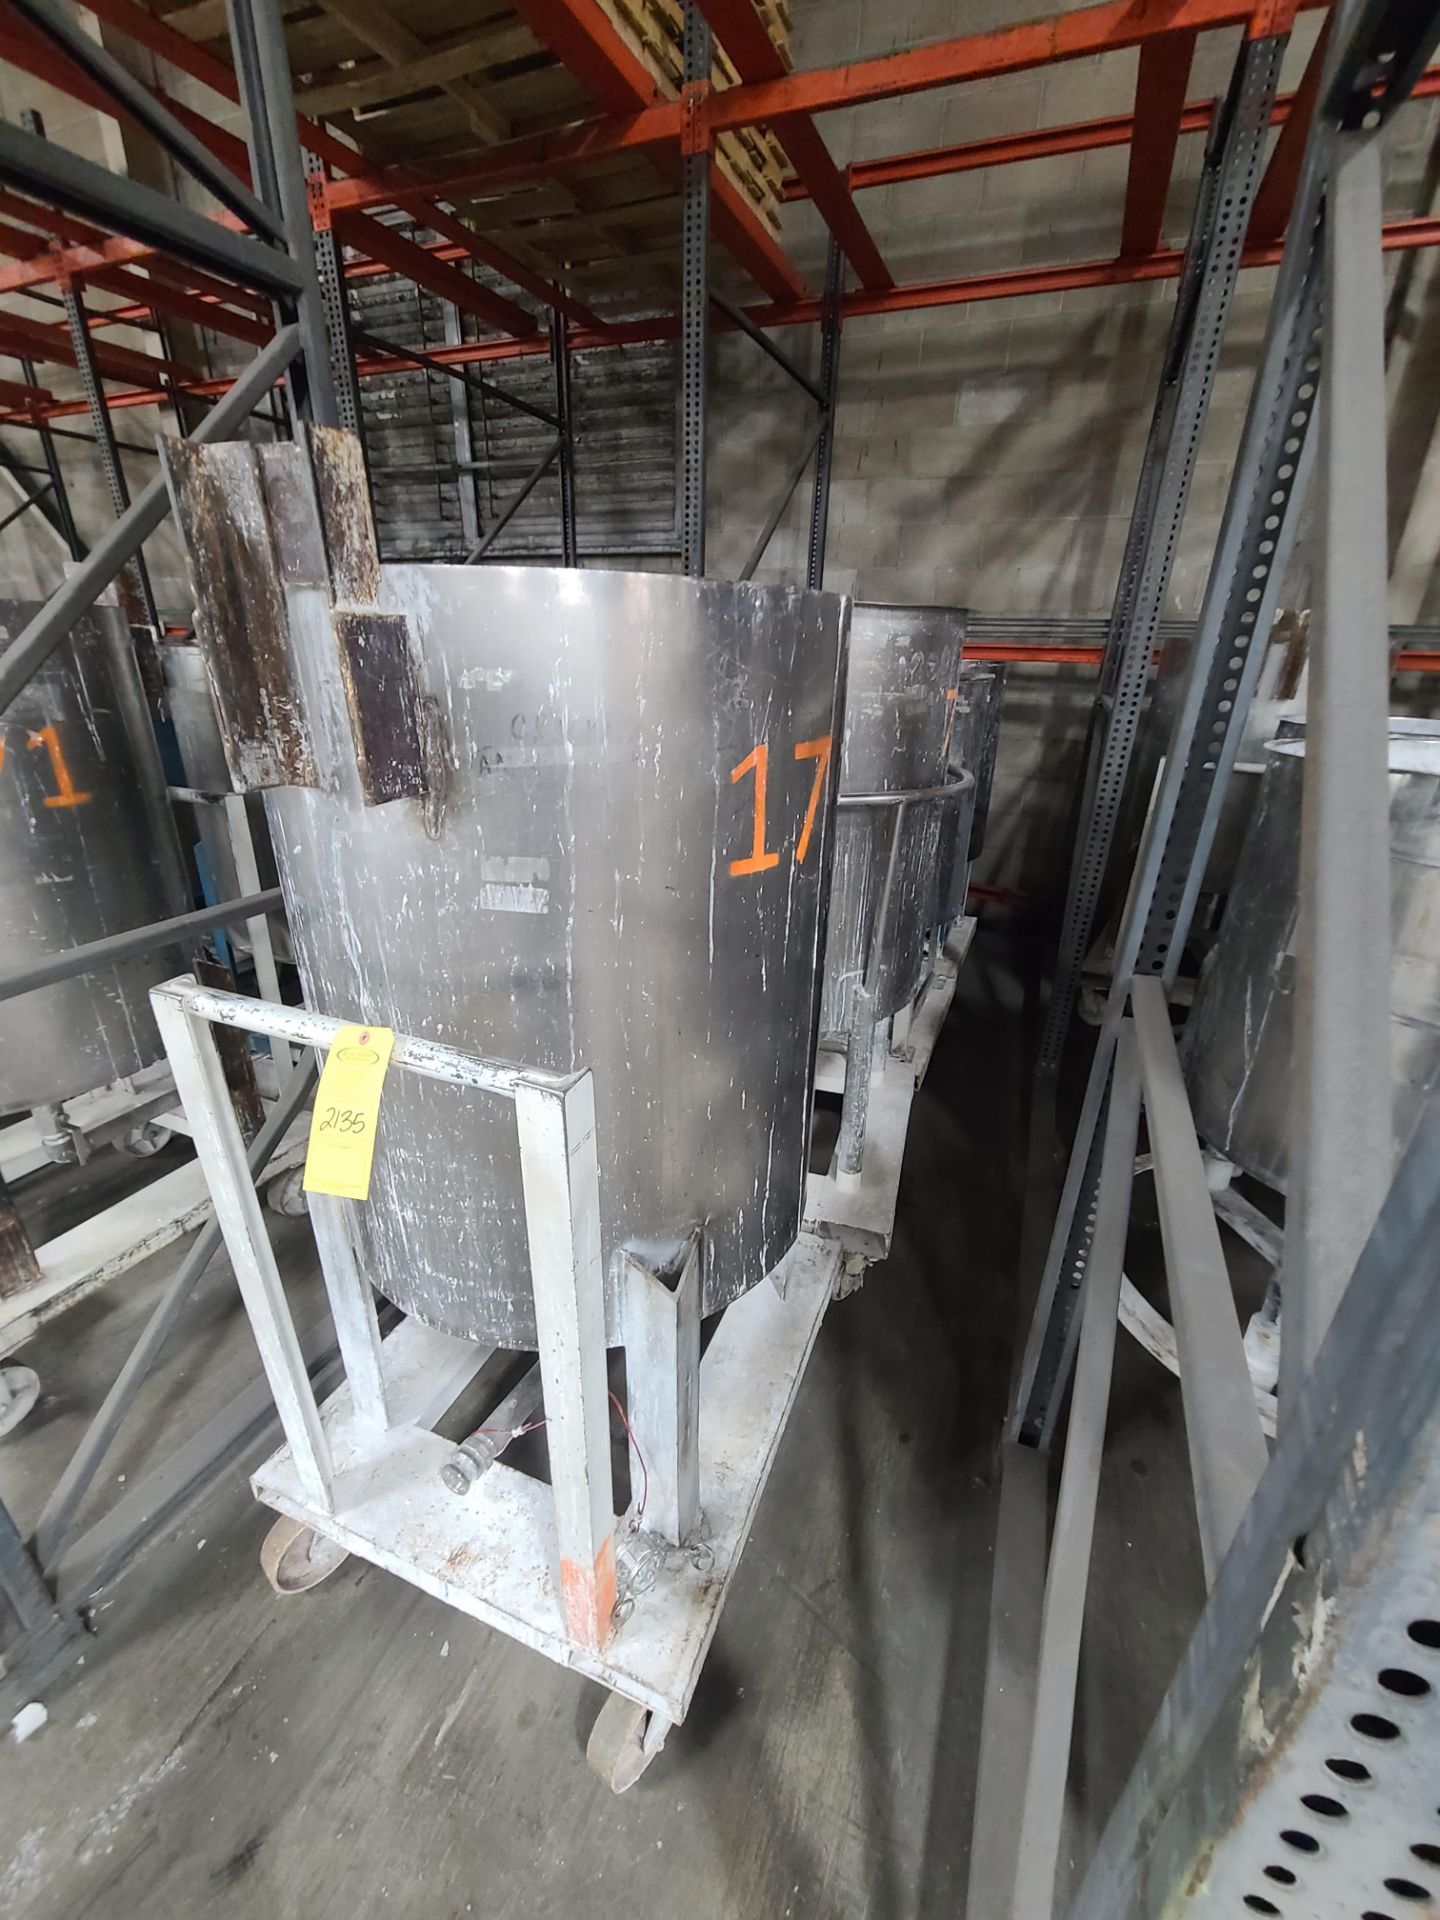 (4) STAINLESS STEEL MIXING TANKS 100-125 GALLON